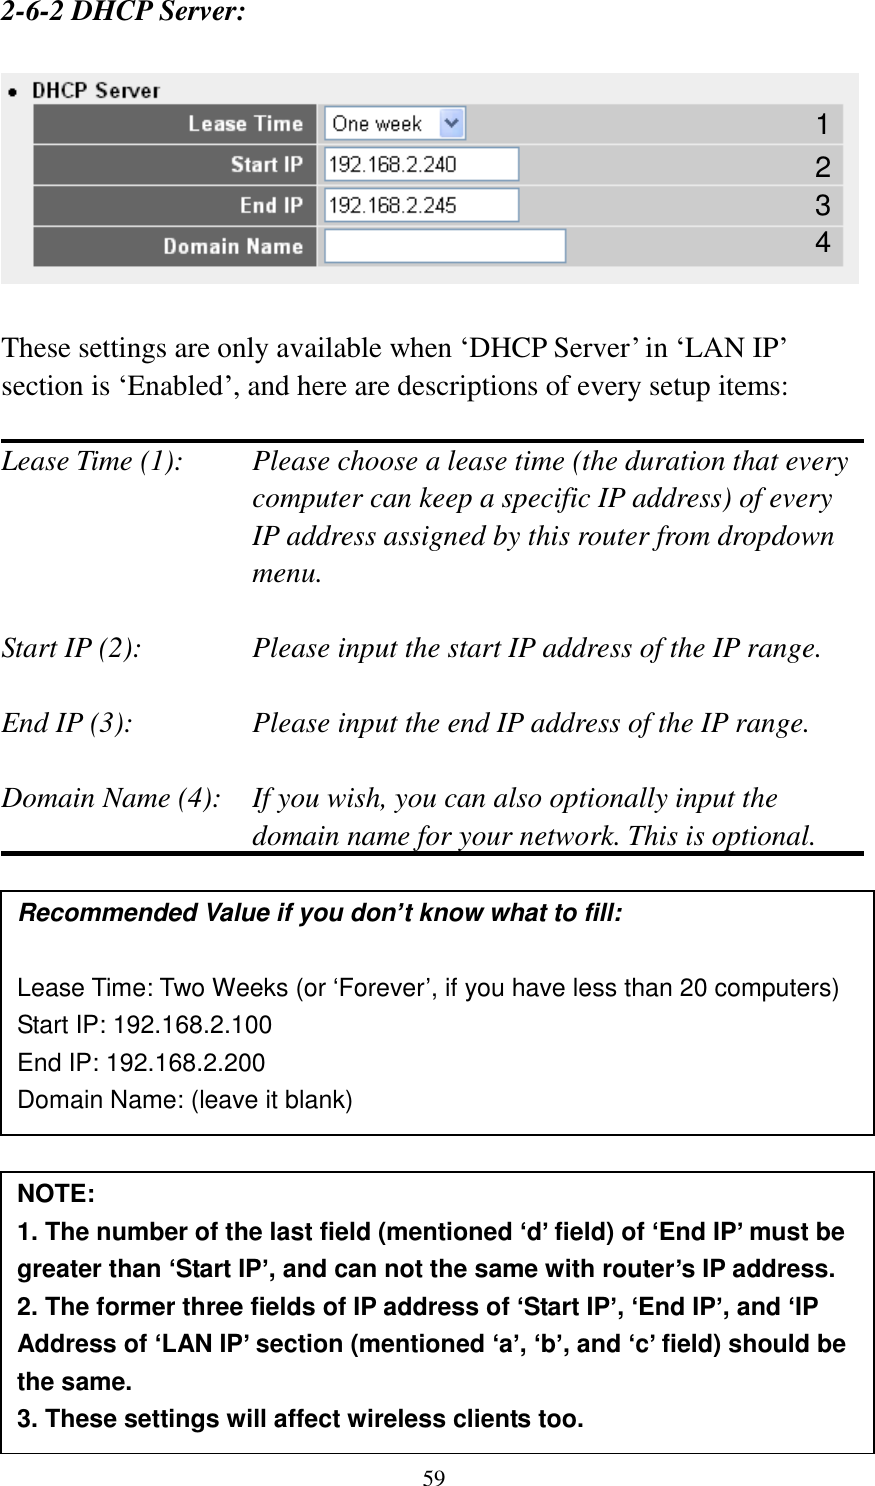 59 2-6-2 DHCP Server:    These settings are only available when „DHCP Server‟ in „LAN IP‟ section is „Enabled‟, and here are descriptions of every setup items:  Lease Time (1):    Please choose a lease time (the duration that every computer can keep a specific IP address) of every IP address assigned by this router from dropdown menu.  Start IP (2):      Please input the start IP address of the IP range.  End IP (3):       Please input the end IP address of the IP range.  Domain Name (4):    If you wish, you can also optionally input the domain name for your network. This is optional.                Recommended Value if you don’t know what to fill:  Lease Time: Two Weeks (or ‘Forever’, if you have less than 20 computers) Start IP: 192.168.2.100 End IP: 192.168.2.200 Domain Name: (leave it blank) NOTE:   1. The number of the last field (mentioned ‘d’ field) of ‘End IP’ must be greater than ‘Start IP’, and can not the same with router’s IP address. 2. The former three fields of IP address of ‘Start IP’, ‘End IP’, and ‘IP Address of ‘LAN IP’ section (mentioned ‘a’, ‘b’, and ‘c’ field) should be the same. 3. These settings will affect wireless clients too. 1 3 4 2 